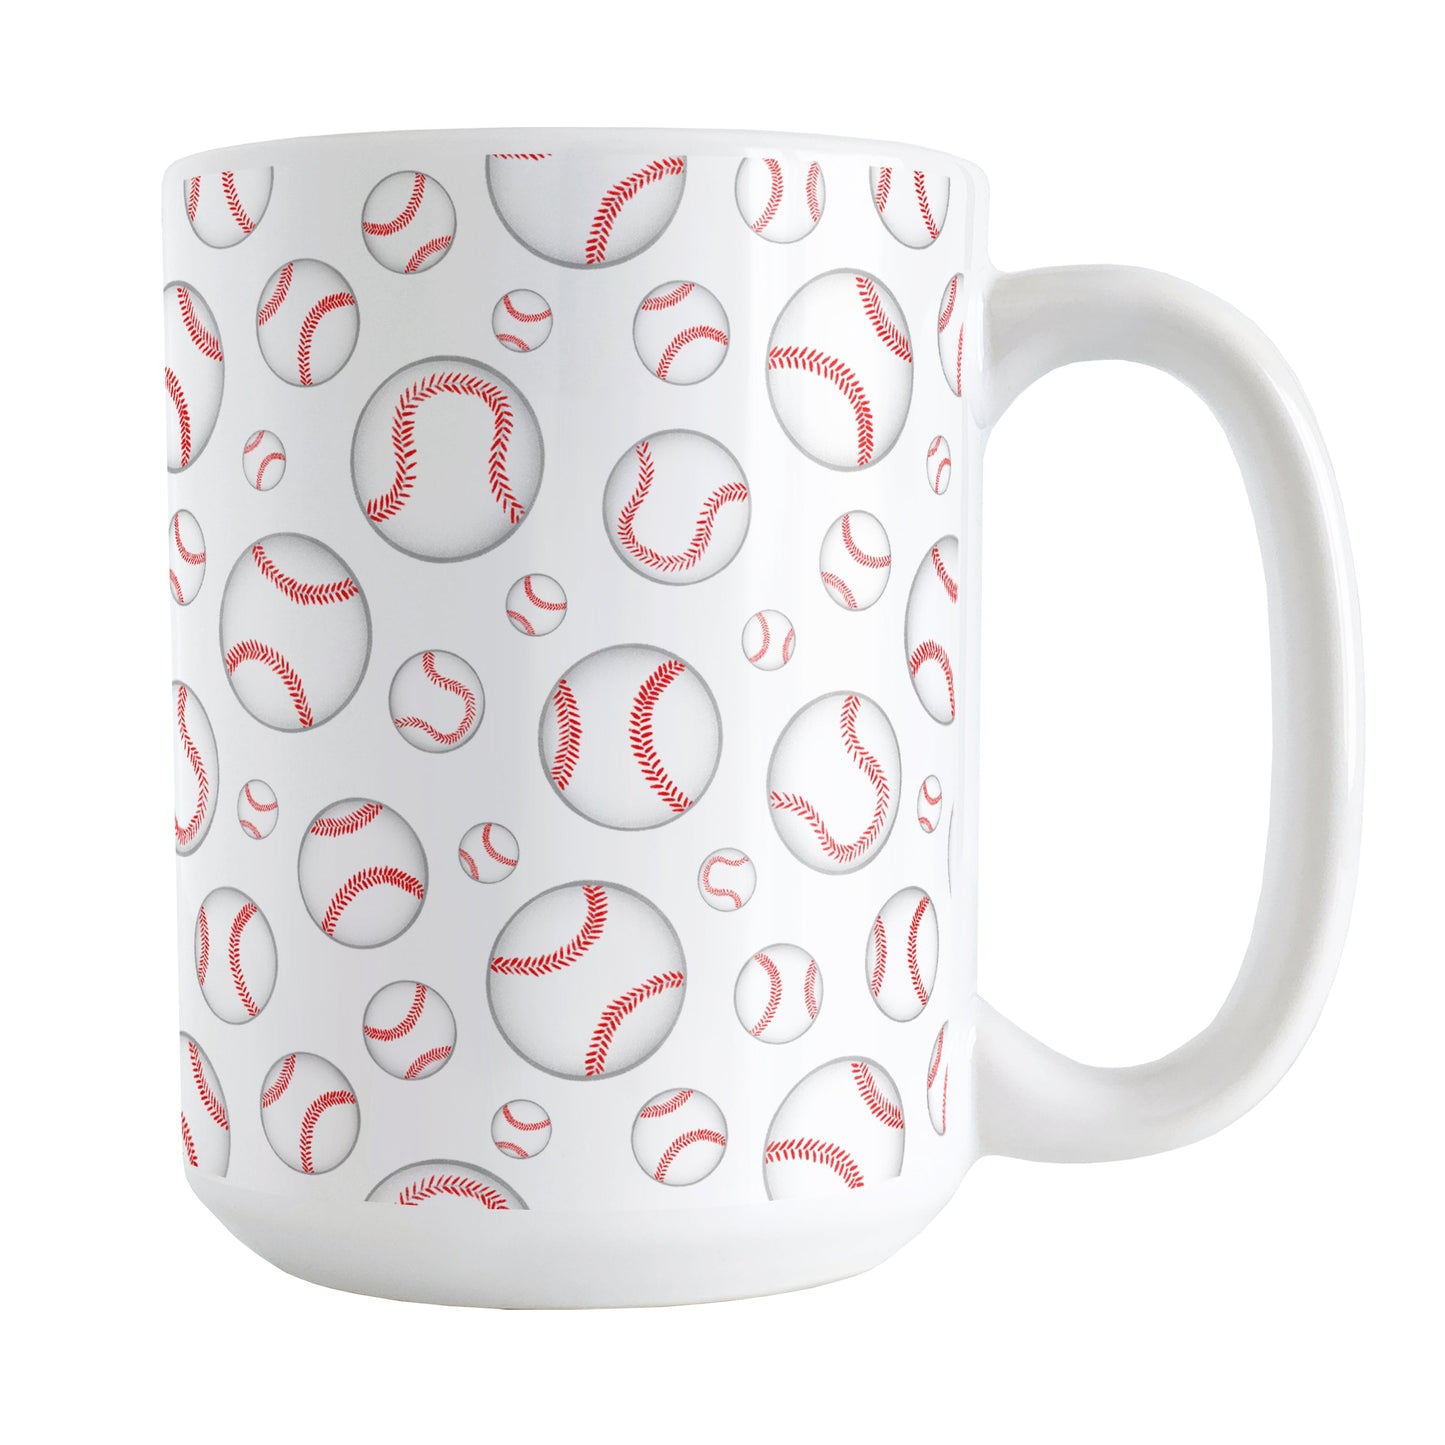 Baseballs Pattern Mug (15oz) at Amy's Coffee Mugs. A ceramic coffee mug designed with hand-drawn baseballs in varying sizes in a pattern that wraps around the mug to the handle. It's perfect for anyone who loves the game of baseball.